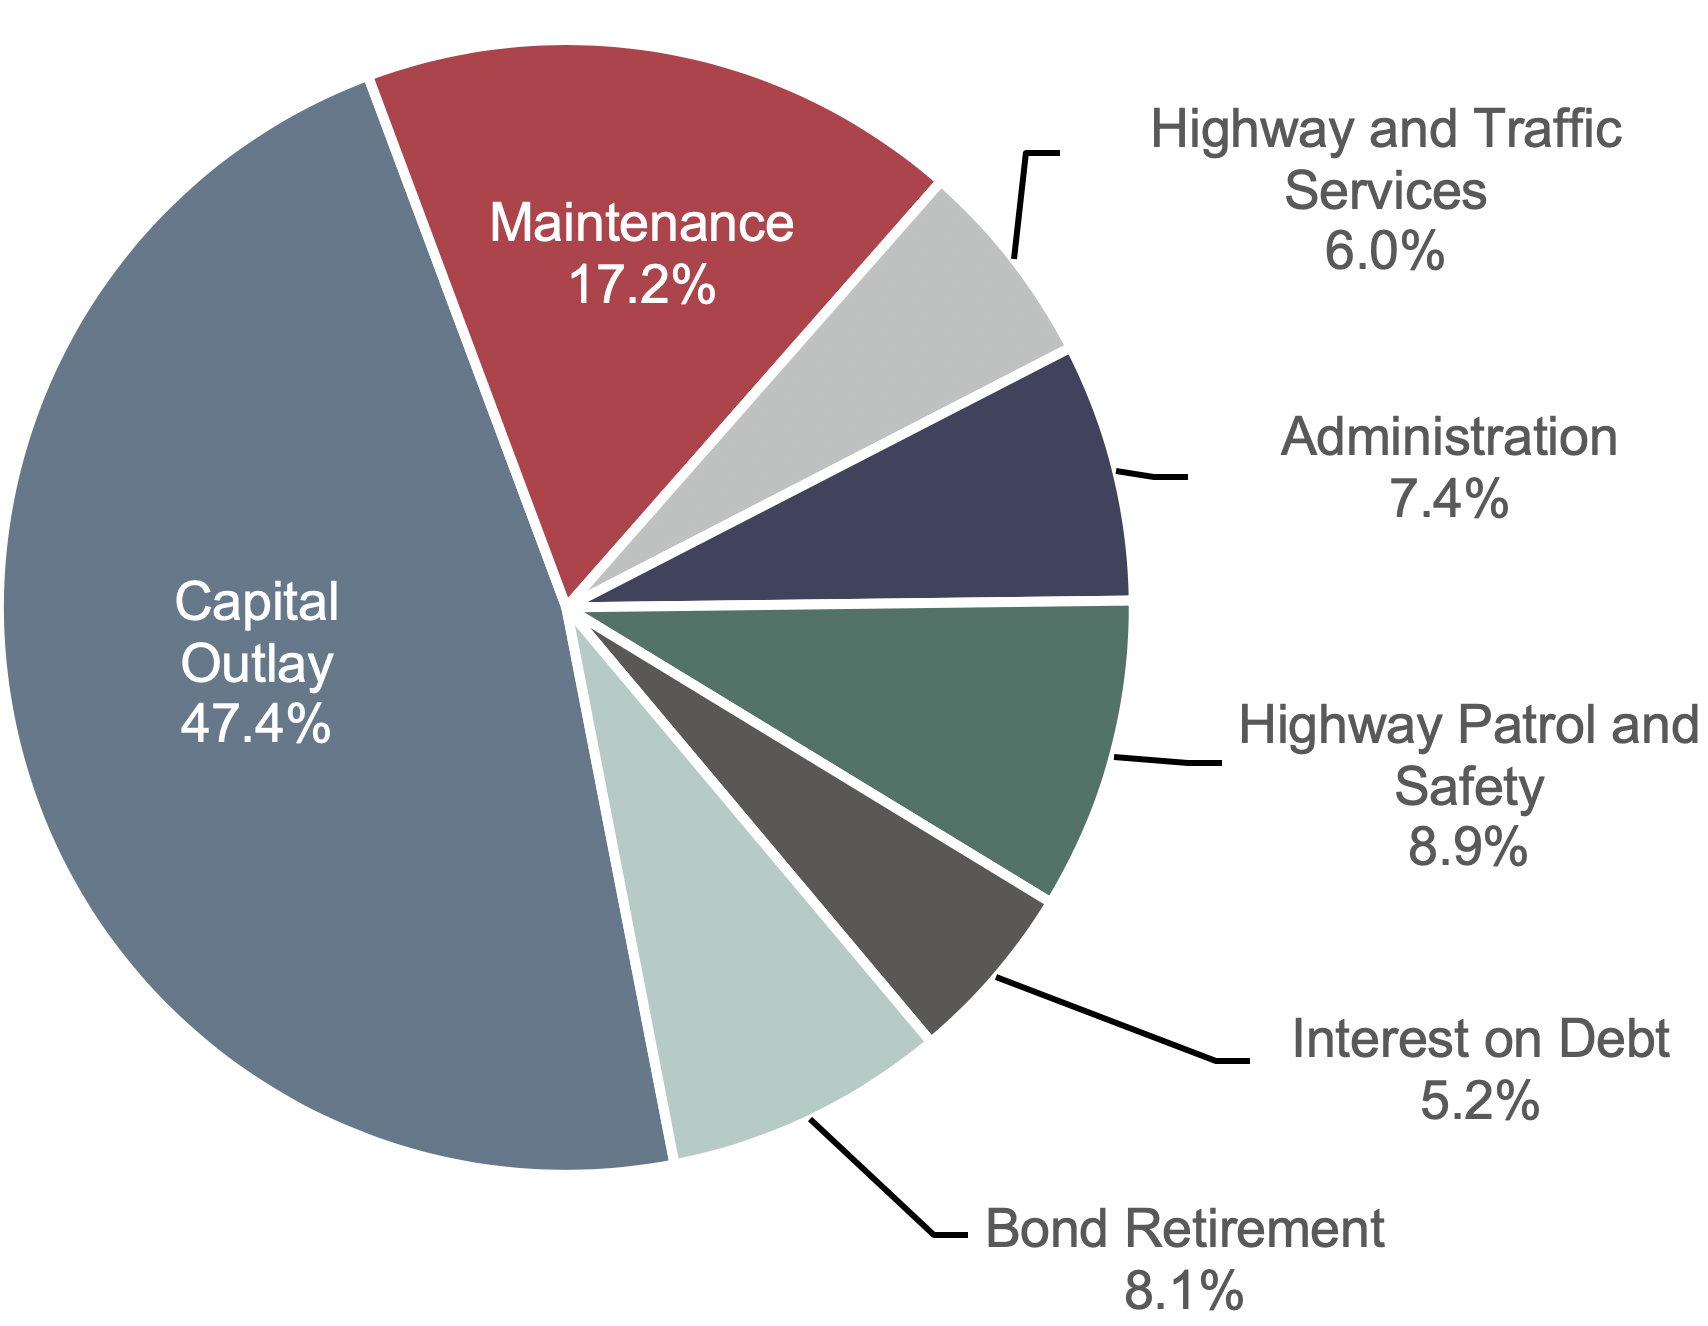 A pie chart shows the distribution of highway expenditure across seven categories of outlay. The category capital outlay accounts for 47.4 percent, the category maintenance accounts for 17.2 percent, the category highway and traffic services accounts for 6.0 percent, the category administration accounts for 7.4 percent, the category highway patrol and safety accounts for 8.9 percent, the category interest on debt accounts for 5.2 percent, and the category bond retirement accounts for 8.1 percent of highway expenditure. Sources: Highway Statistics 2015, Table HF-10A (preliminary), and unpublished FHWA data.